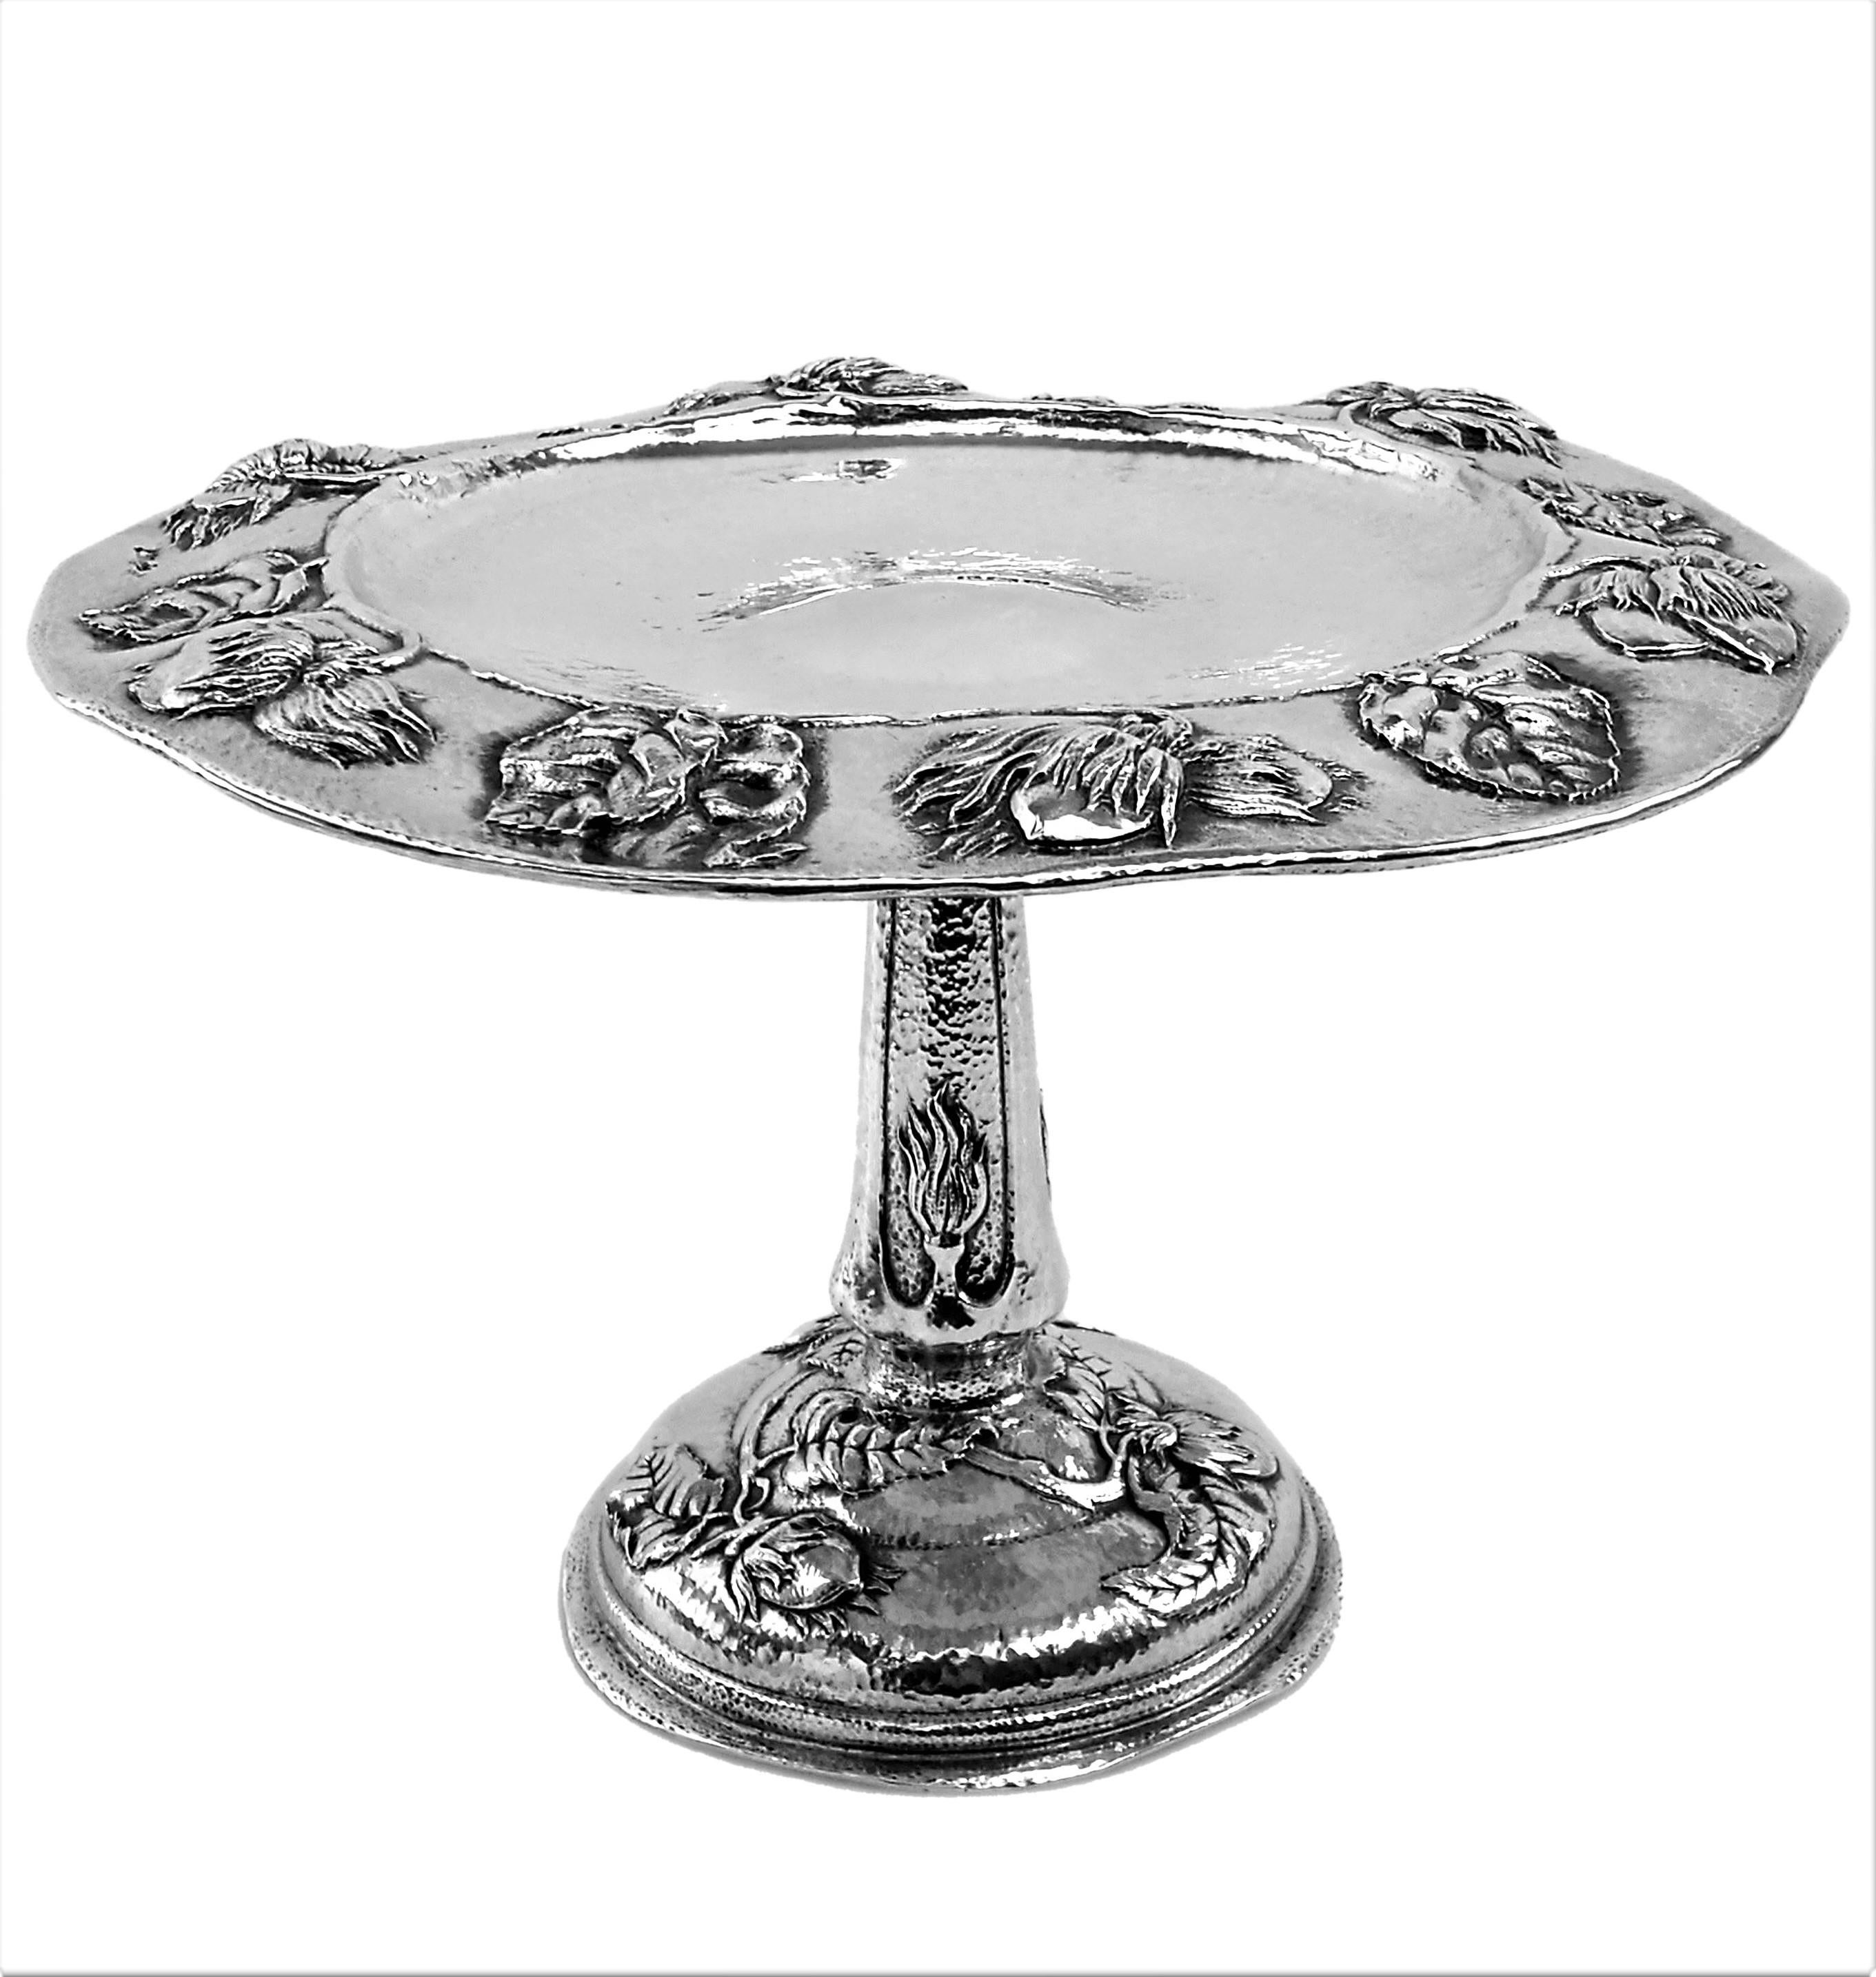 A gorgeous Antique Sterling Silver Arts & Crafts Dish / Tazza Comport with a wide shallow bowl on a tall column and a domed pedestal foot. The body of the Dish is covered in a hammered patterning while the Rim of the Bowl, The central column and the